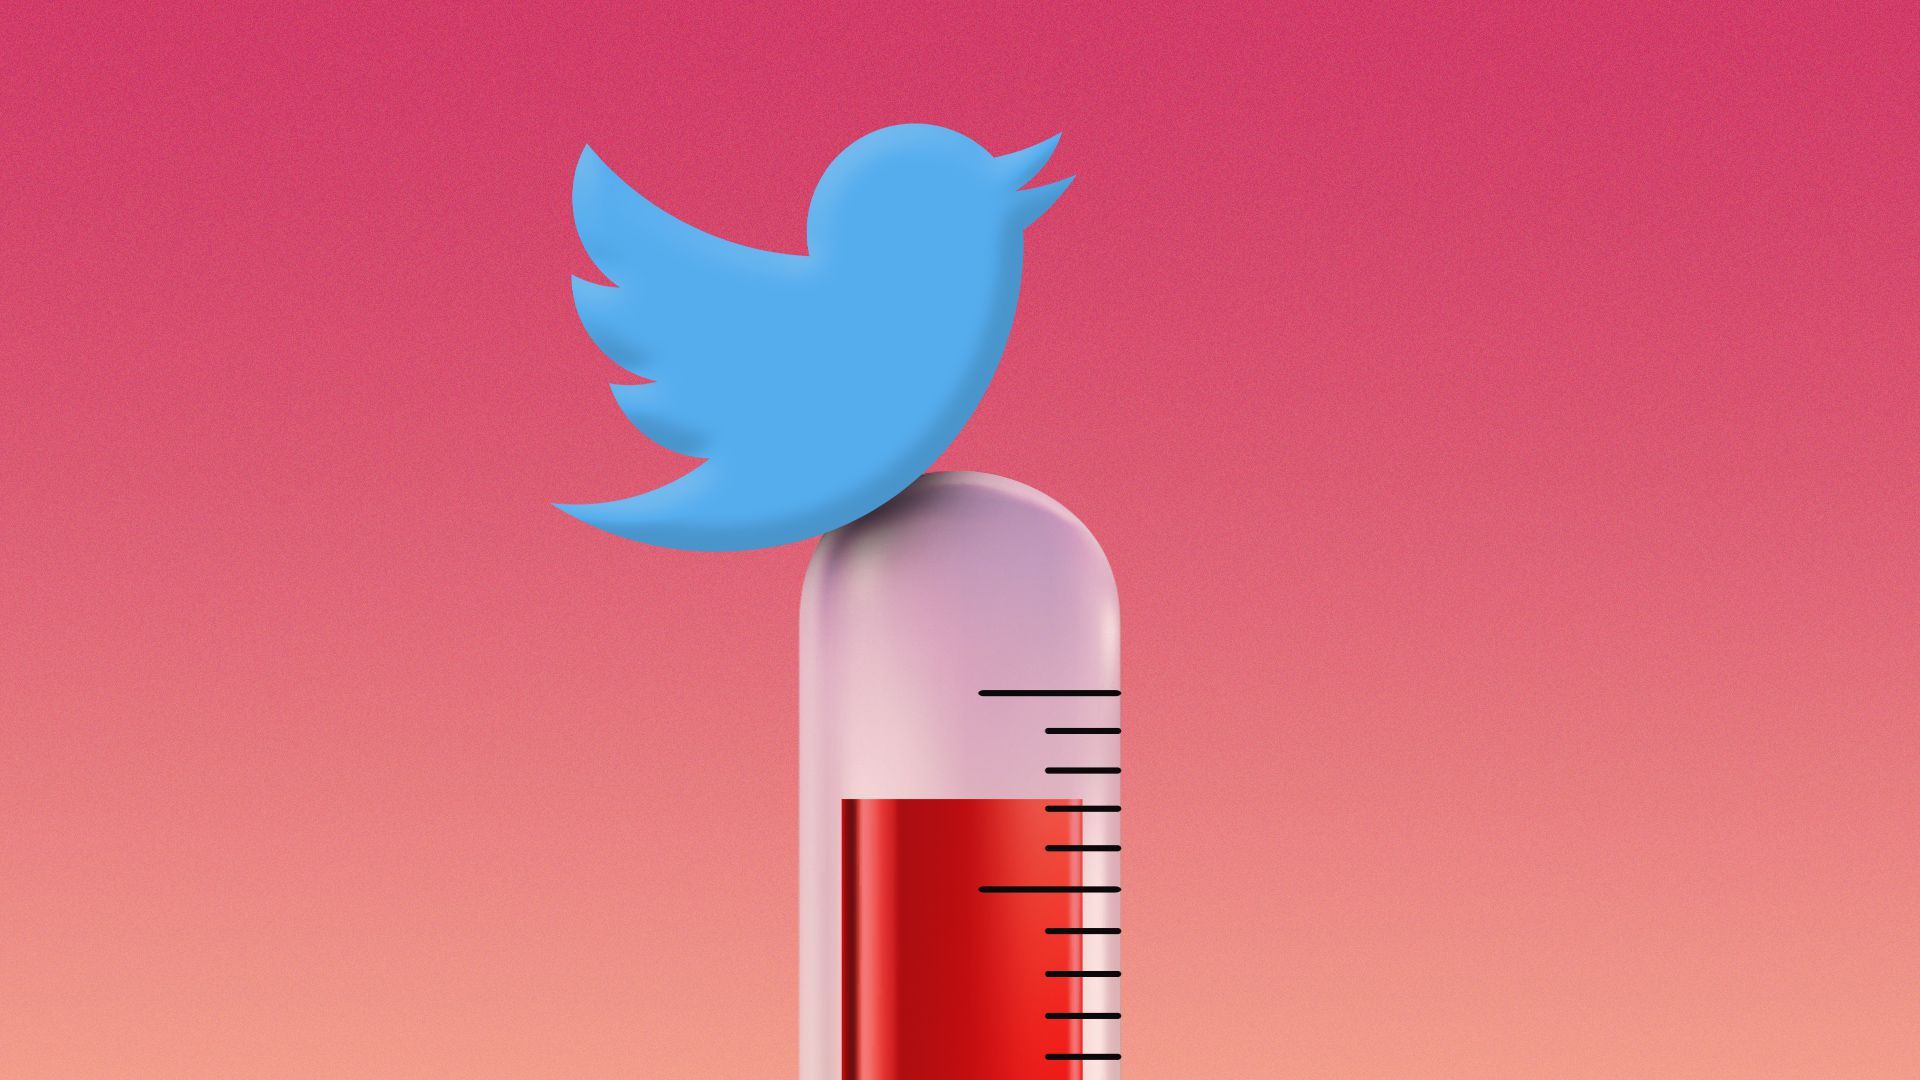 Illustration of the Twitter logo perched on top of a thermometer.